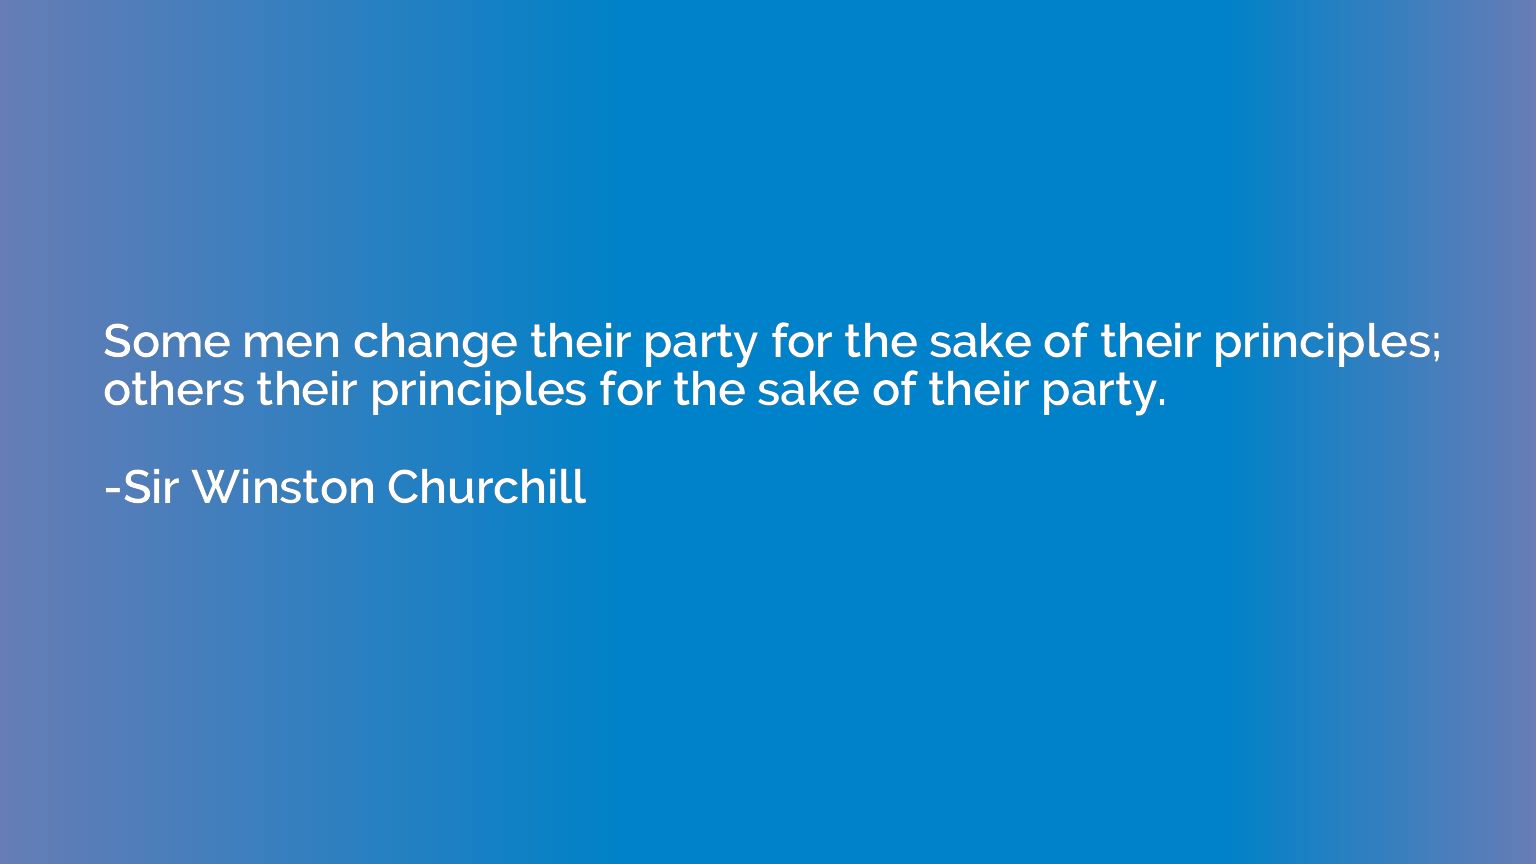 Some men change their party for the sake of their principles